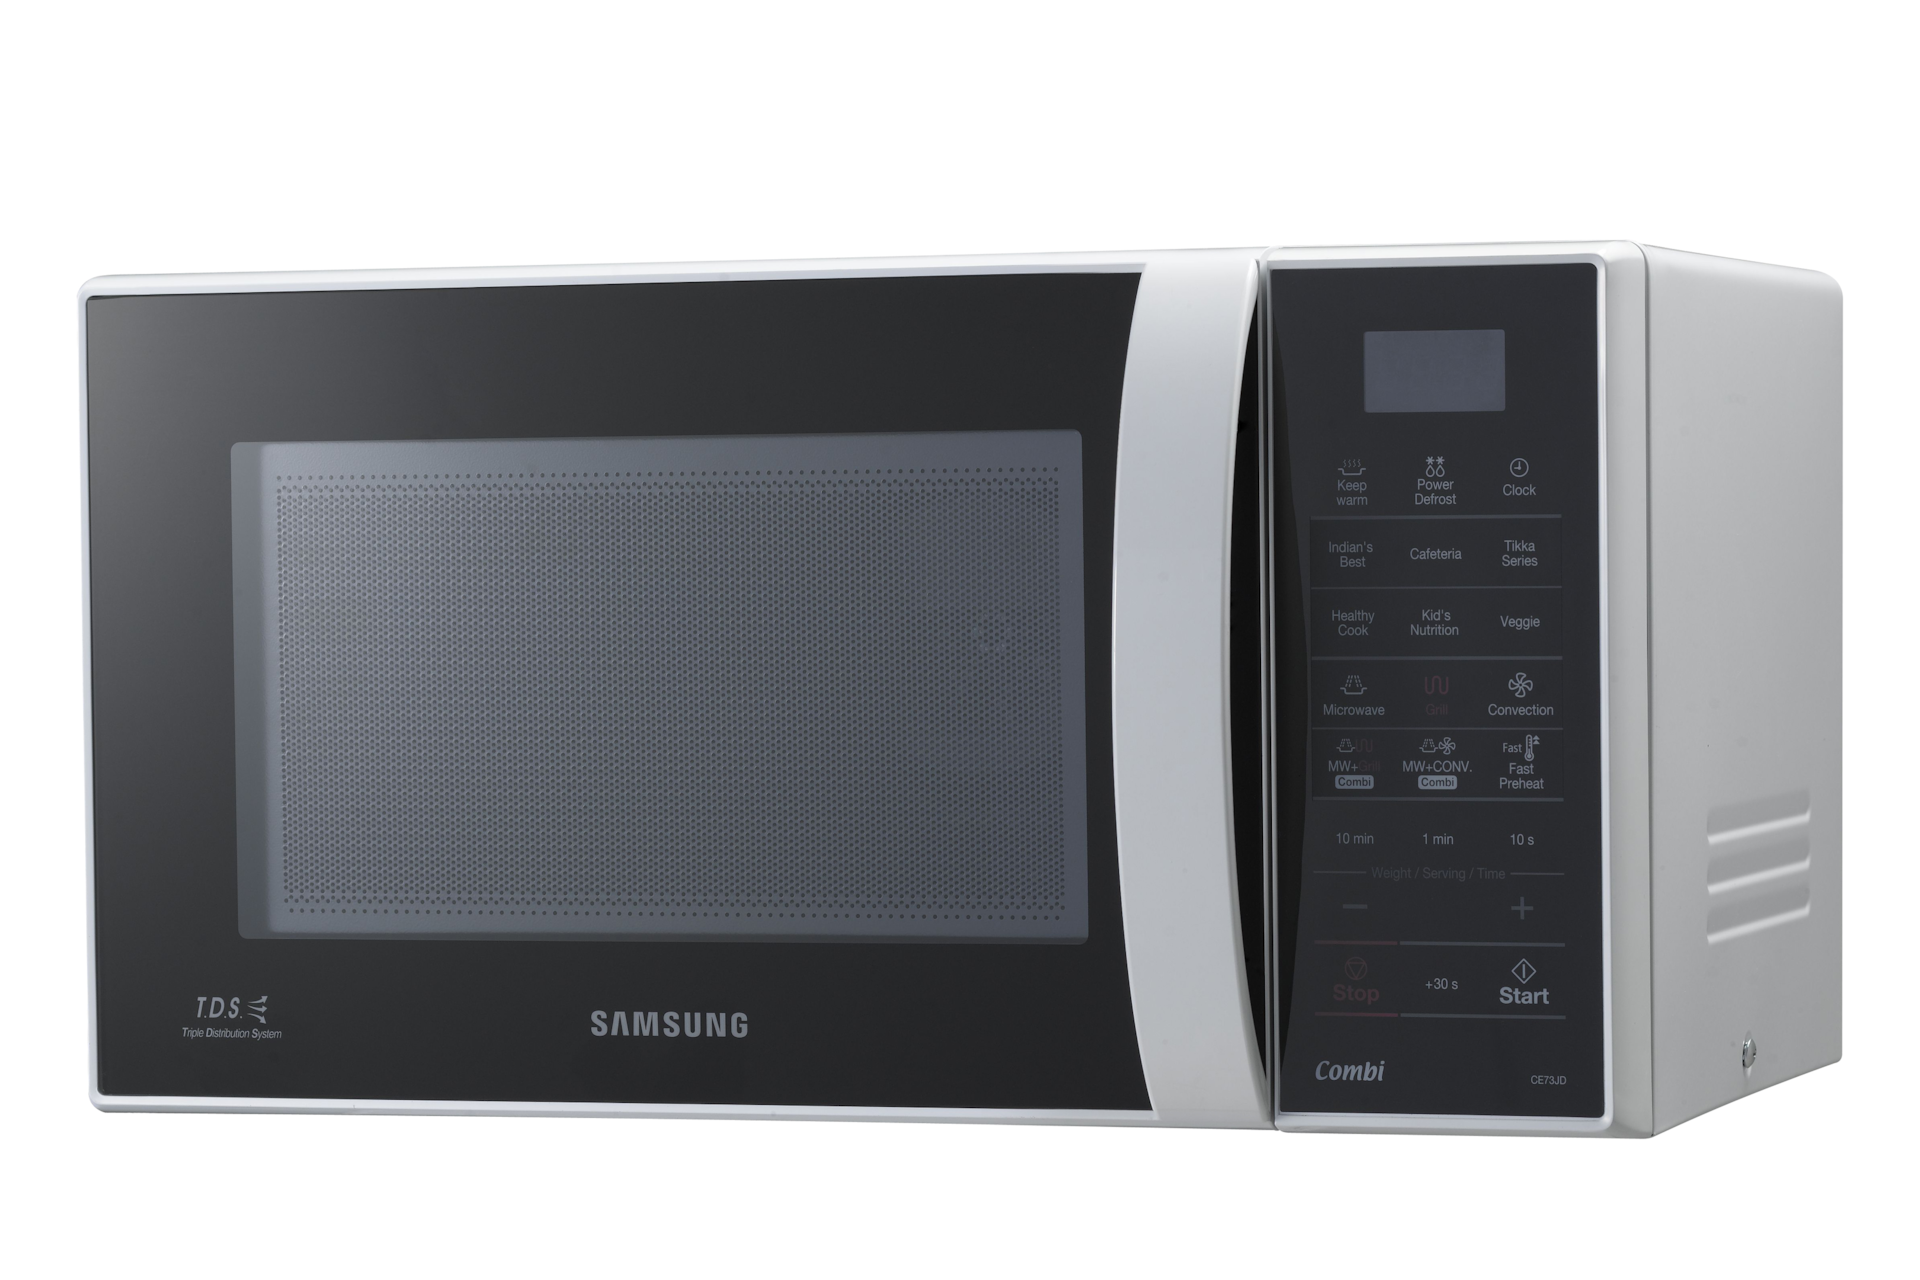 Samsung CE73JD Oven Price, best microwave in India, Specs